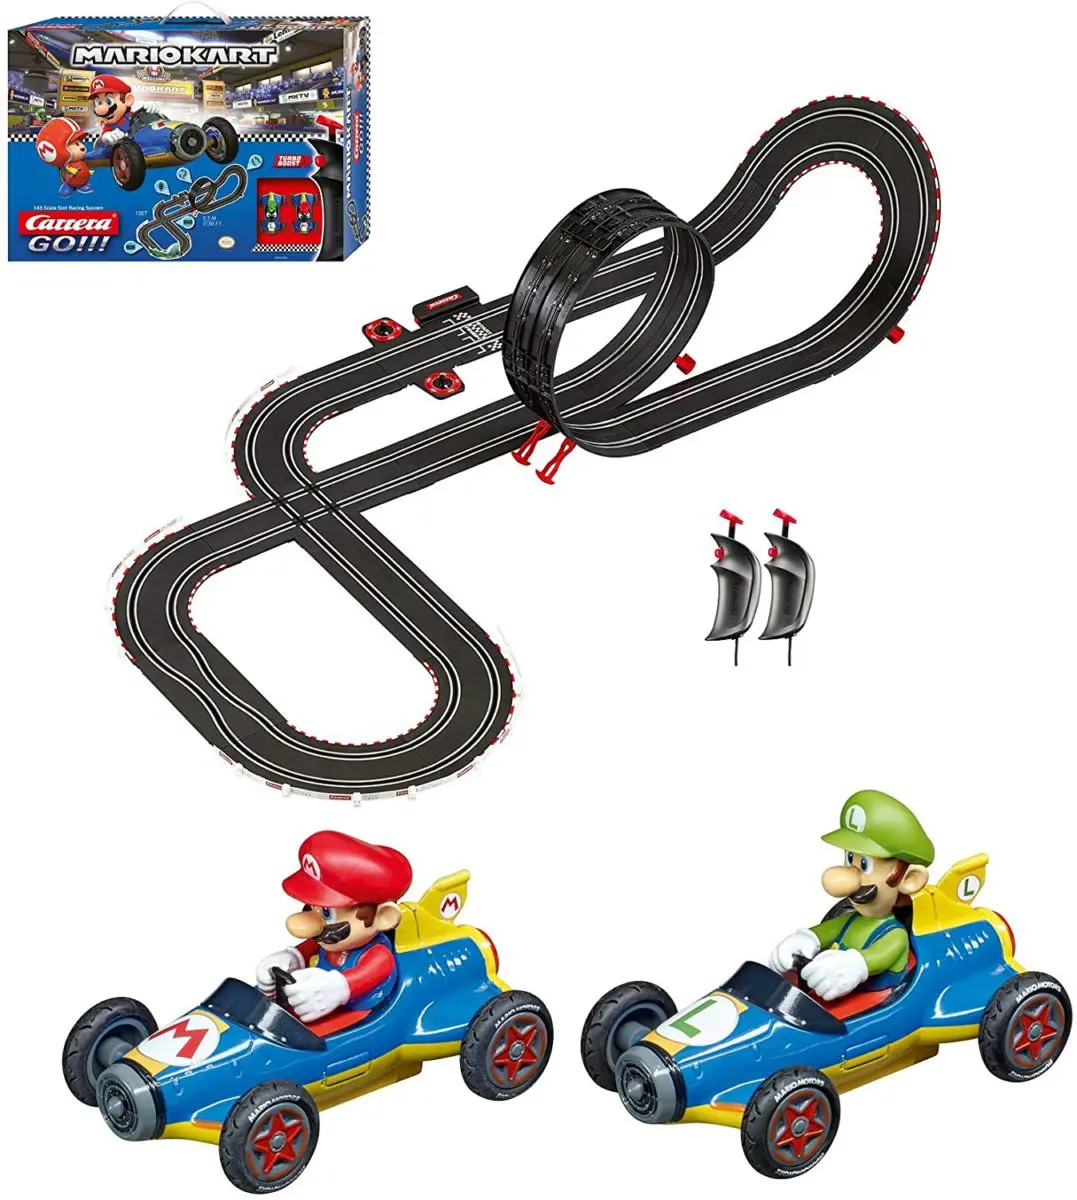 Carrera GO!!! Mario Kart Mach 8 Electric Slot Car Racing - Top Toys and Gifts for Eight Year Old Boys 1